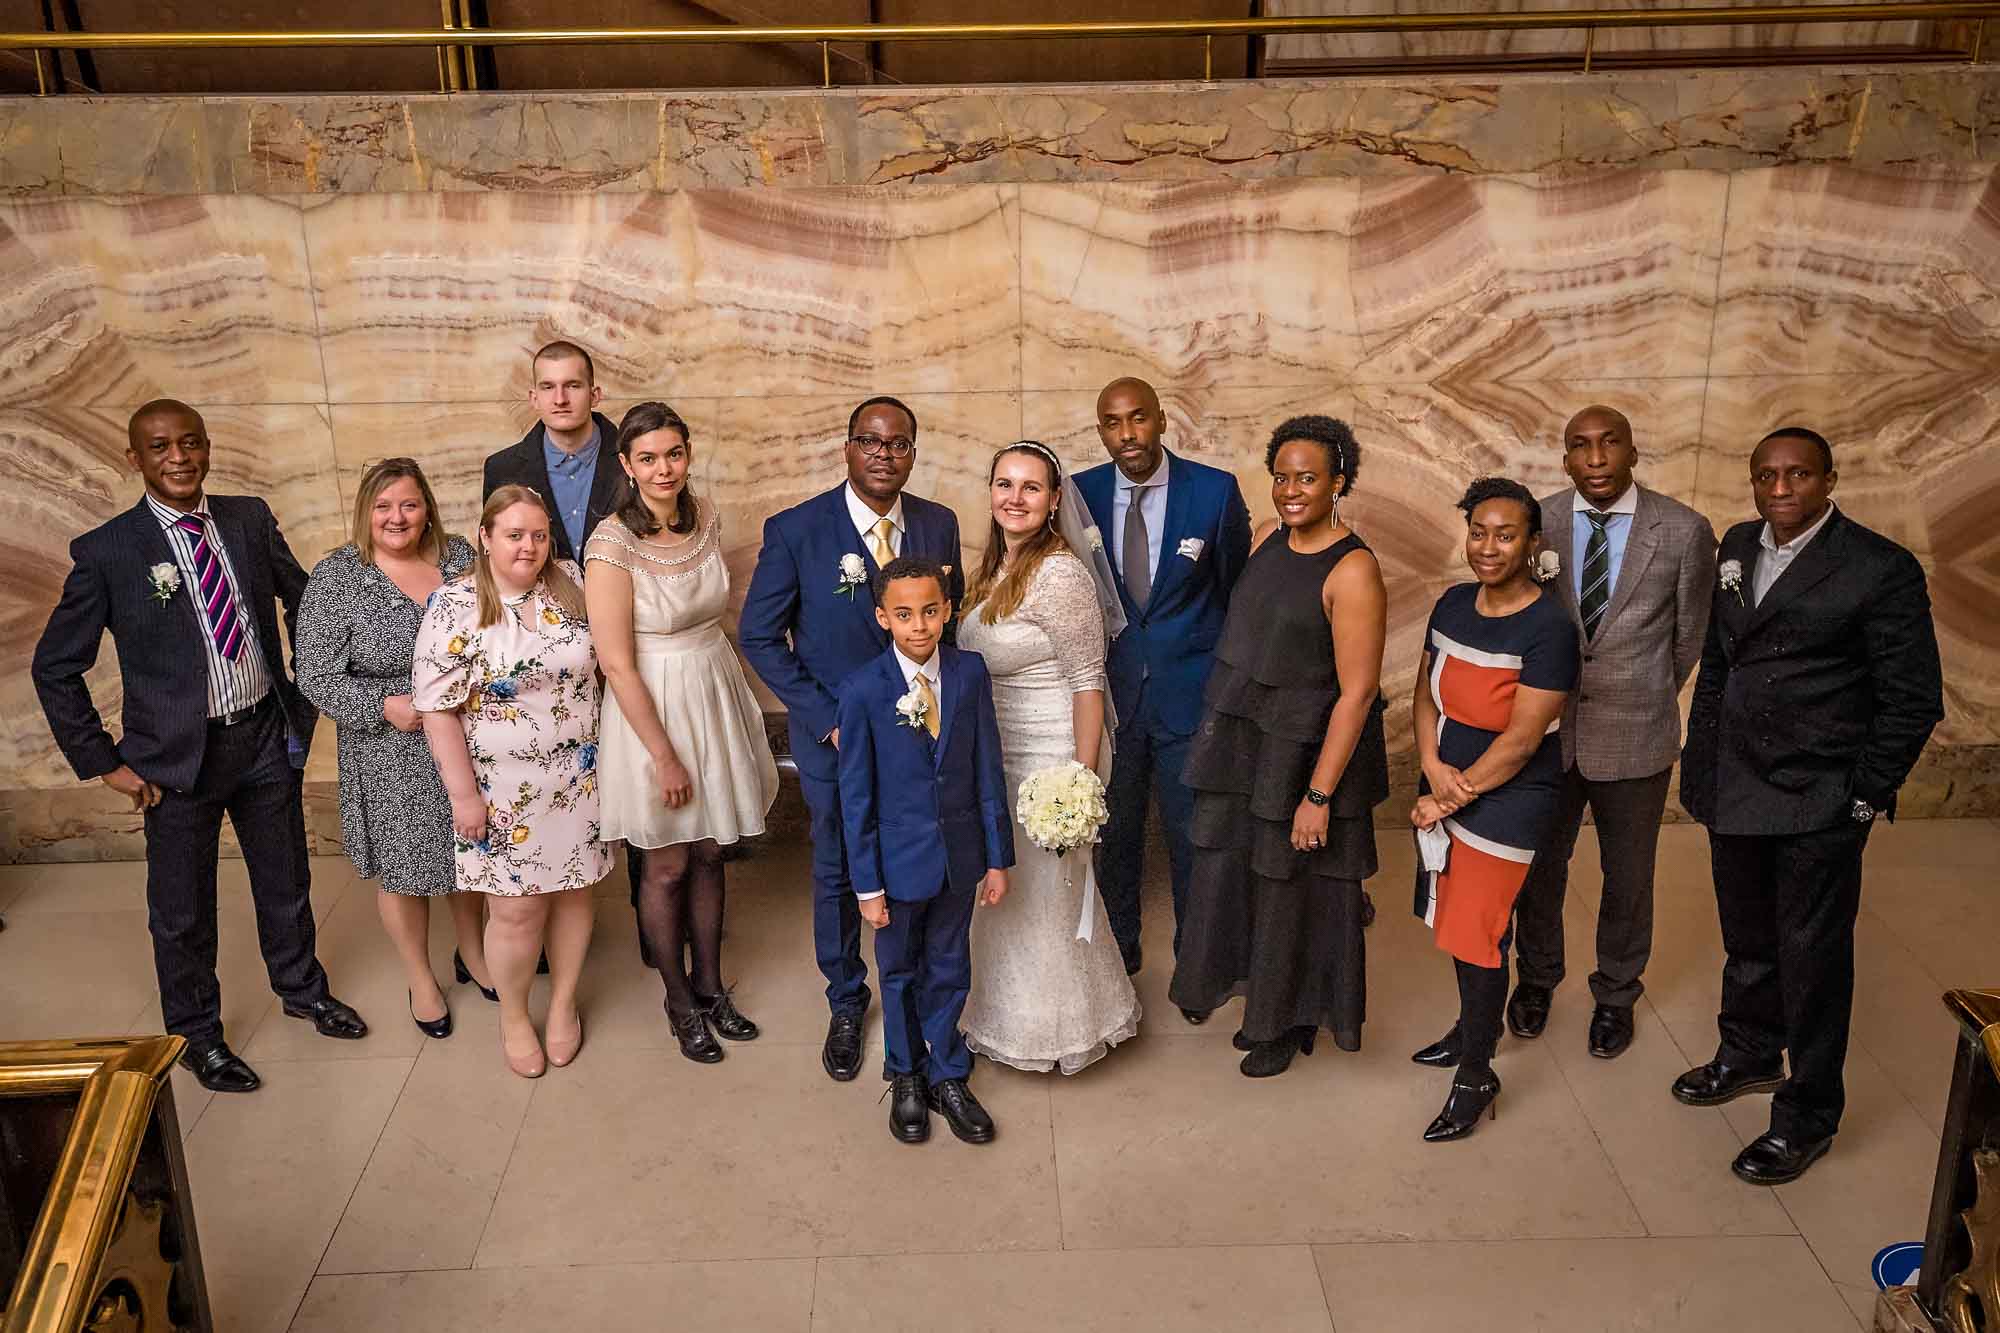 All guests pose at top of the marbled staircase at Wandsworth Town Hall